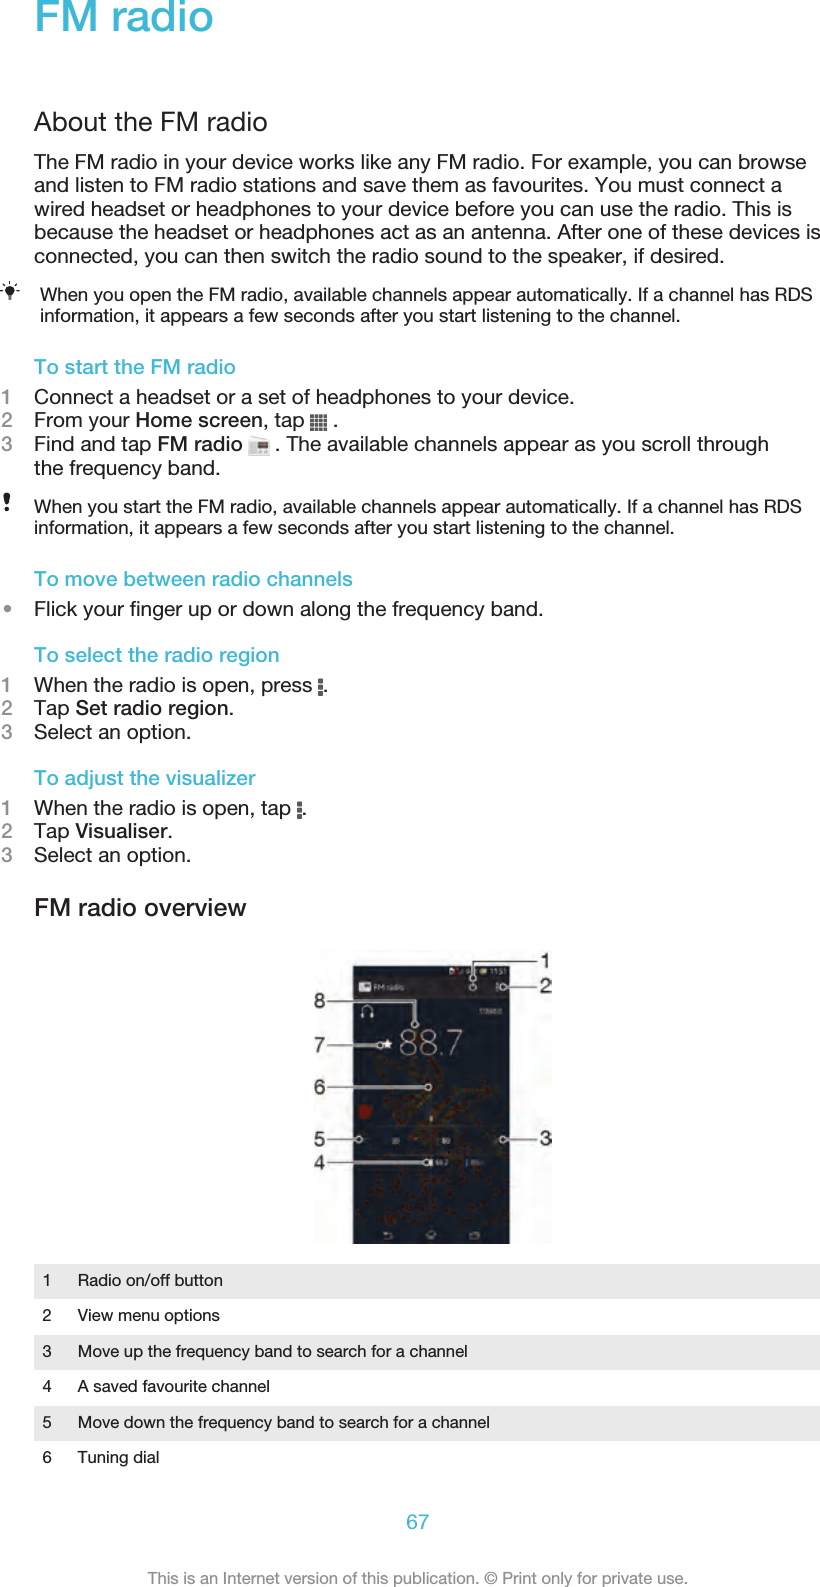 FM radioAbout the FM radioThe FM radio in your device works like any FM radio. For example, you can browseand listen to FM radio stations and save them as favourites. You must connect awired headset or headphones to your device before you can use the radio. This isbecause the headset or headphones act as an antenna. After one of these devices isconnected, you can then switch the radio sound to the speaker, if desired.When you open the FM radio, available channels appear automatically. If a channel has RDSinformation, it appears a few seconds after you start listening to the channel.To start the FM radio1Connect a headset or a set of headphones to your device.2From your Home screen, tap   .3Find and tap FM radio   . The available channels appear as you scroll throughthe frequency band.When you start the FM radio, available channels appear automatically. If a channel has RDSinformation, it appears a few seconds after you start listening to the channel.To move between radio channels•Flick your finger up or down along the frequency band.To select the radio region1When the radio is open, press  .2Tap Set radio region.3Select an option.To adjust the visualizer1When the radio is open, tap  .2Tap Visualiser.3Select an option.FM radio overview1Radio on/off button2 View menu options3 Move up the frequency band to search for a channel4 A saved favourite channel5 Move down the frequency band to search for a channel6 Tuning dial67This is an Internet version of this publication. © Print only for private use.